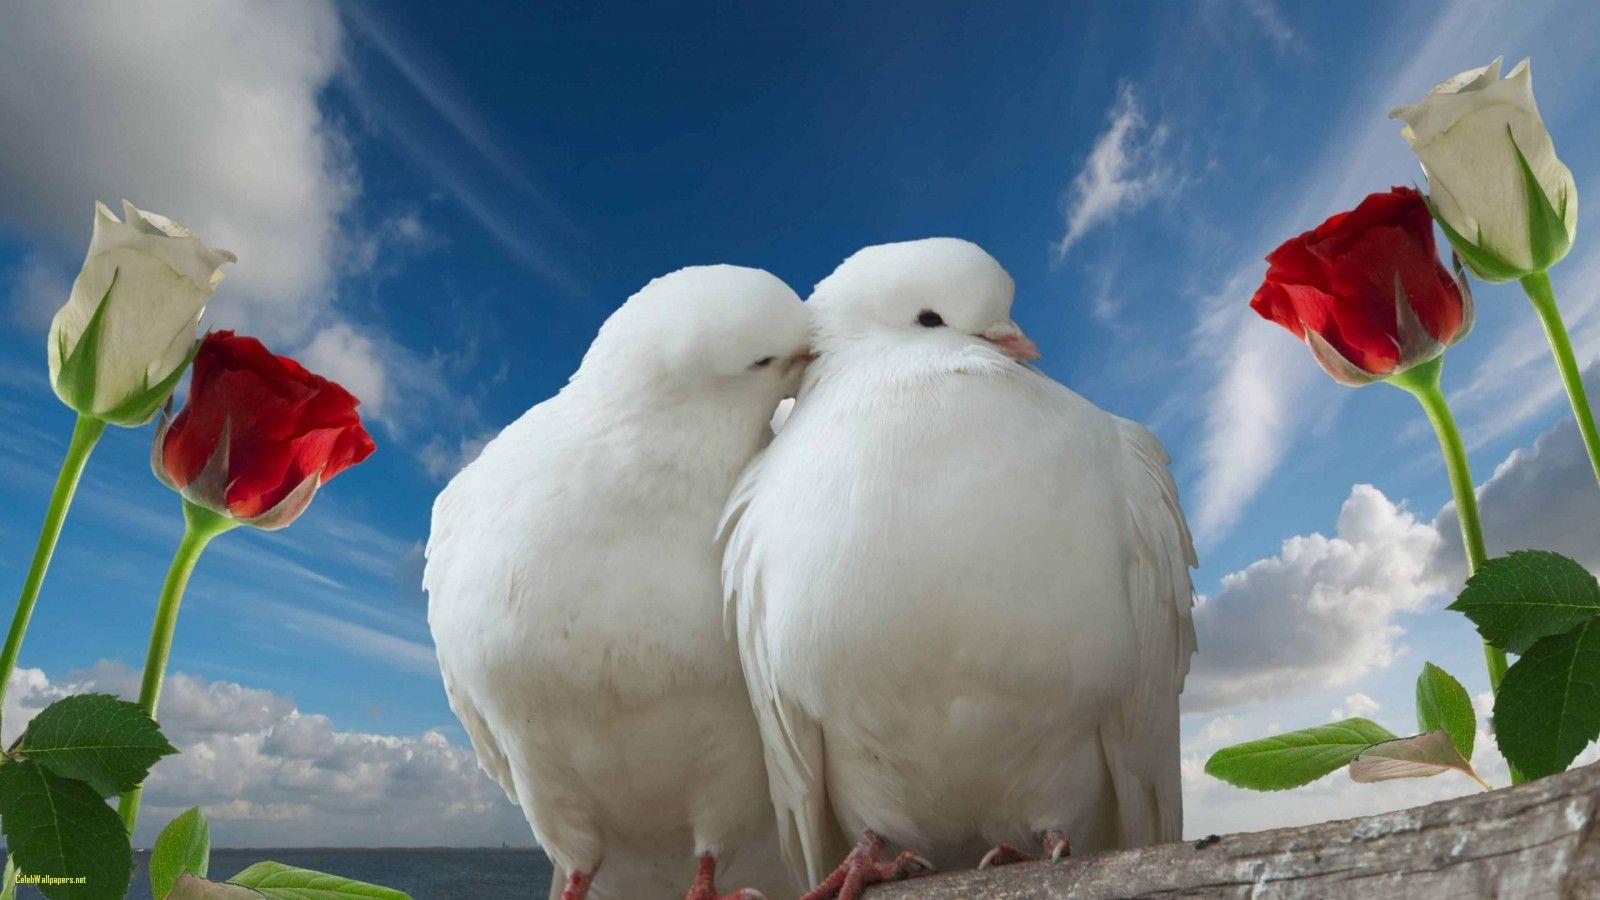 Doves Couple with Rose Love Wallpaper Best Of Love Rose Image